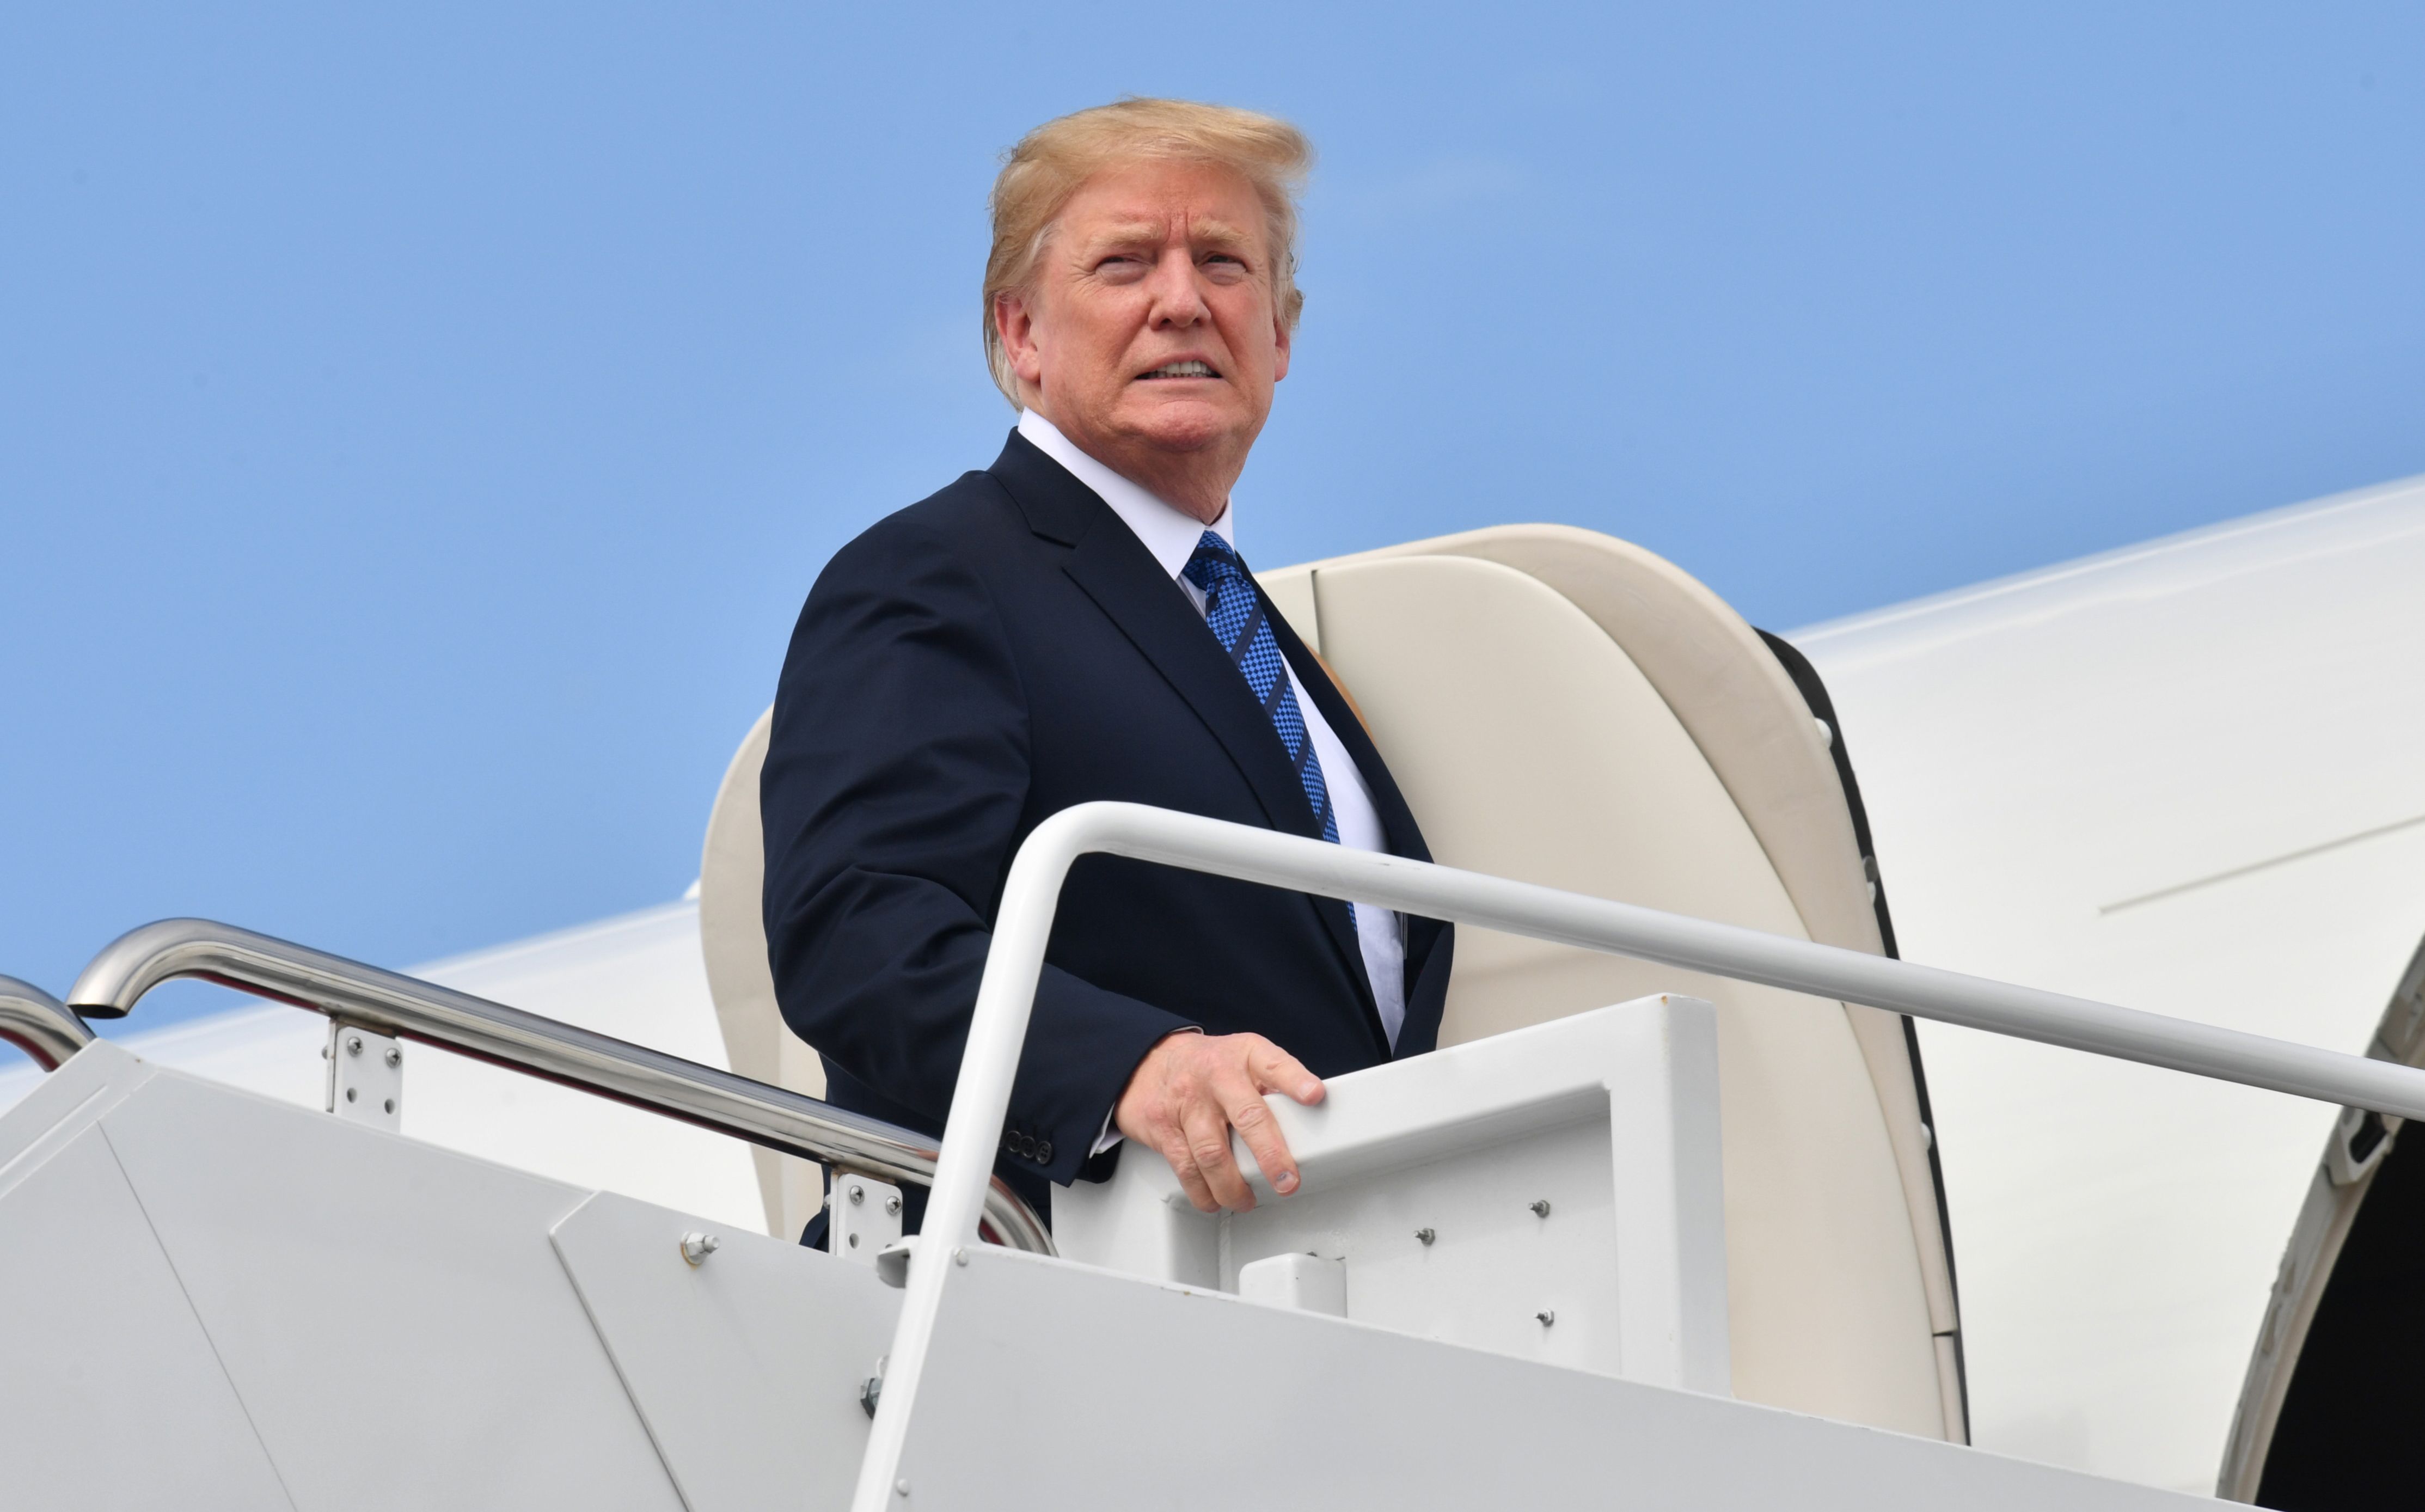 President Donald Trump as he boards Air Force One, July 20, 2018. (Nicholas Kamm—AFP/Getty Images)